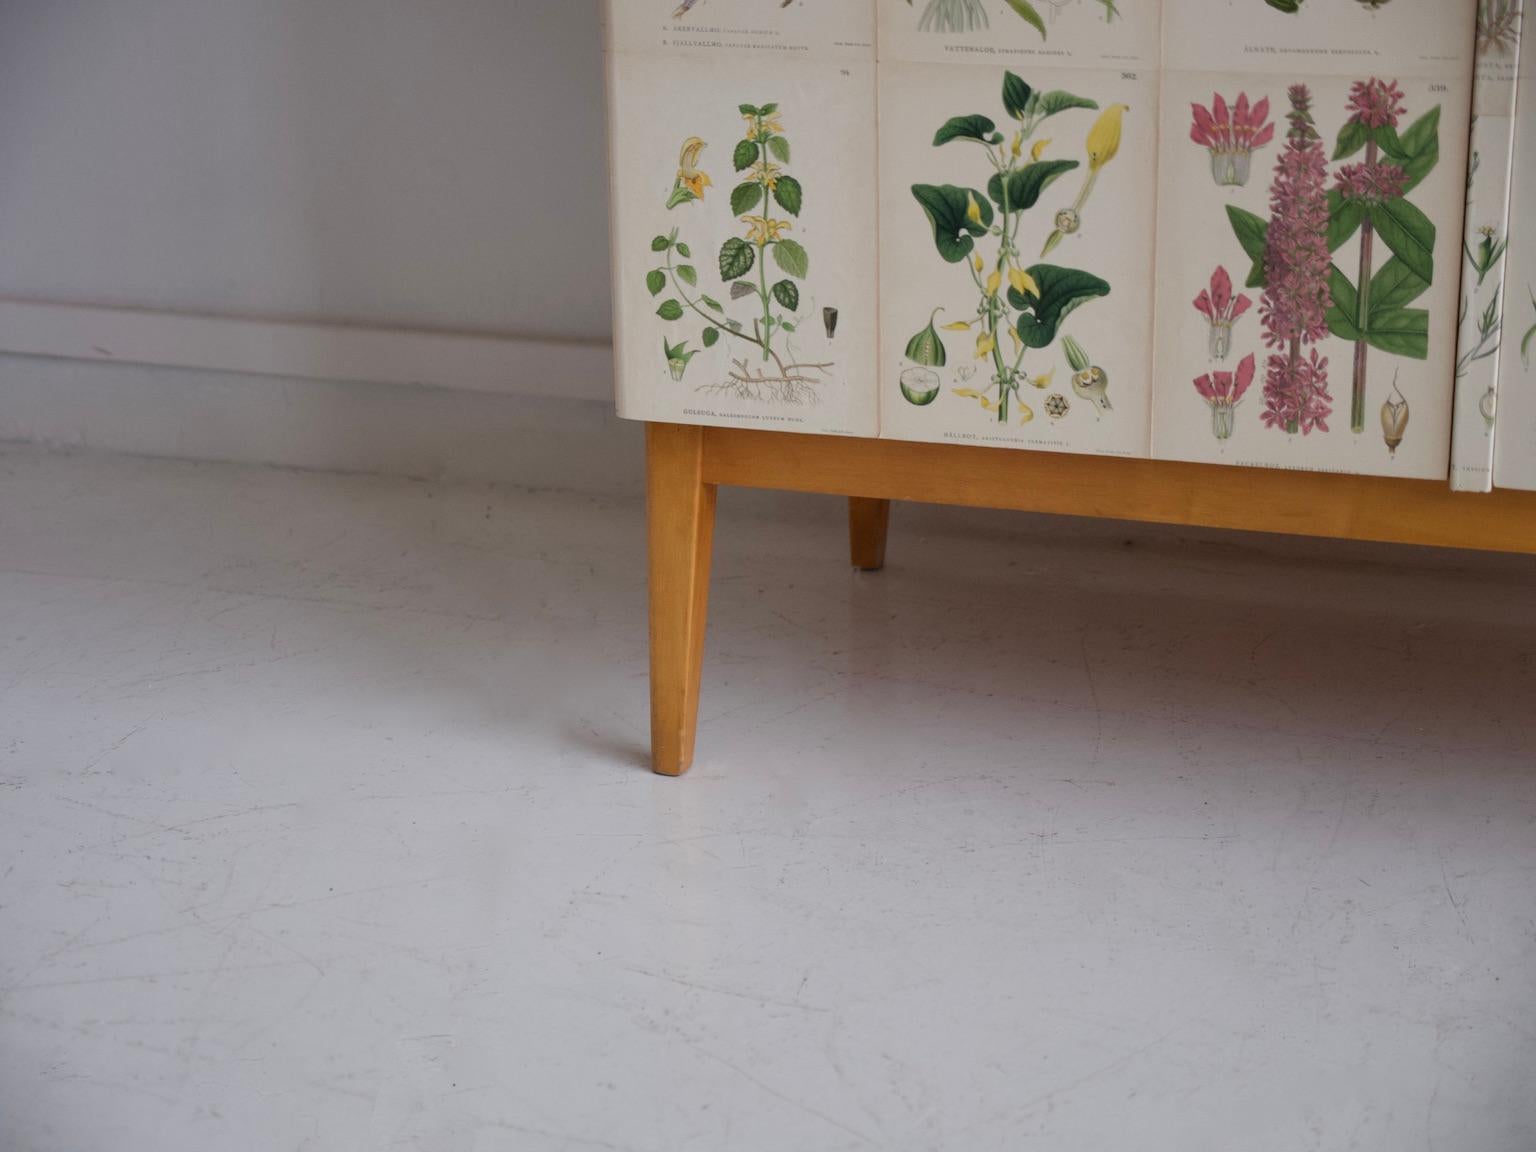 Wooden Cabinet with Nordens Flora Illustrations 2